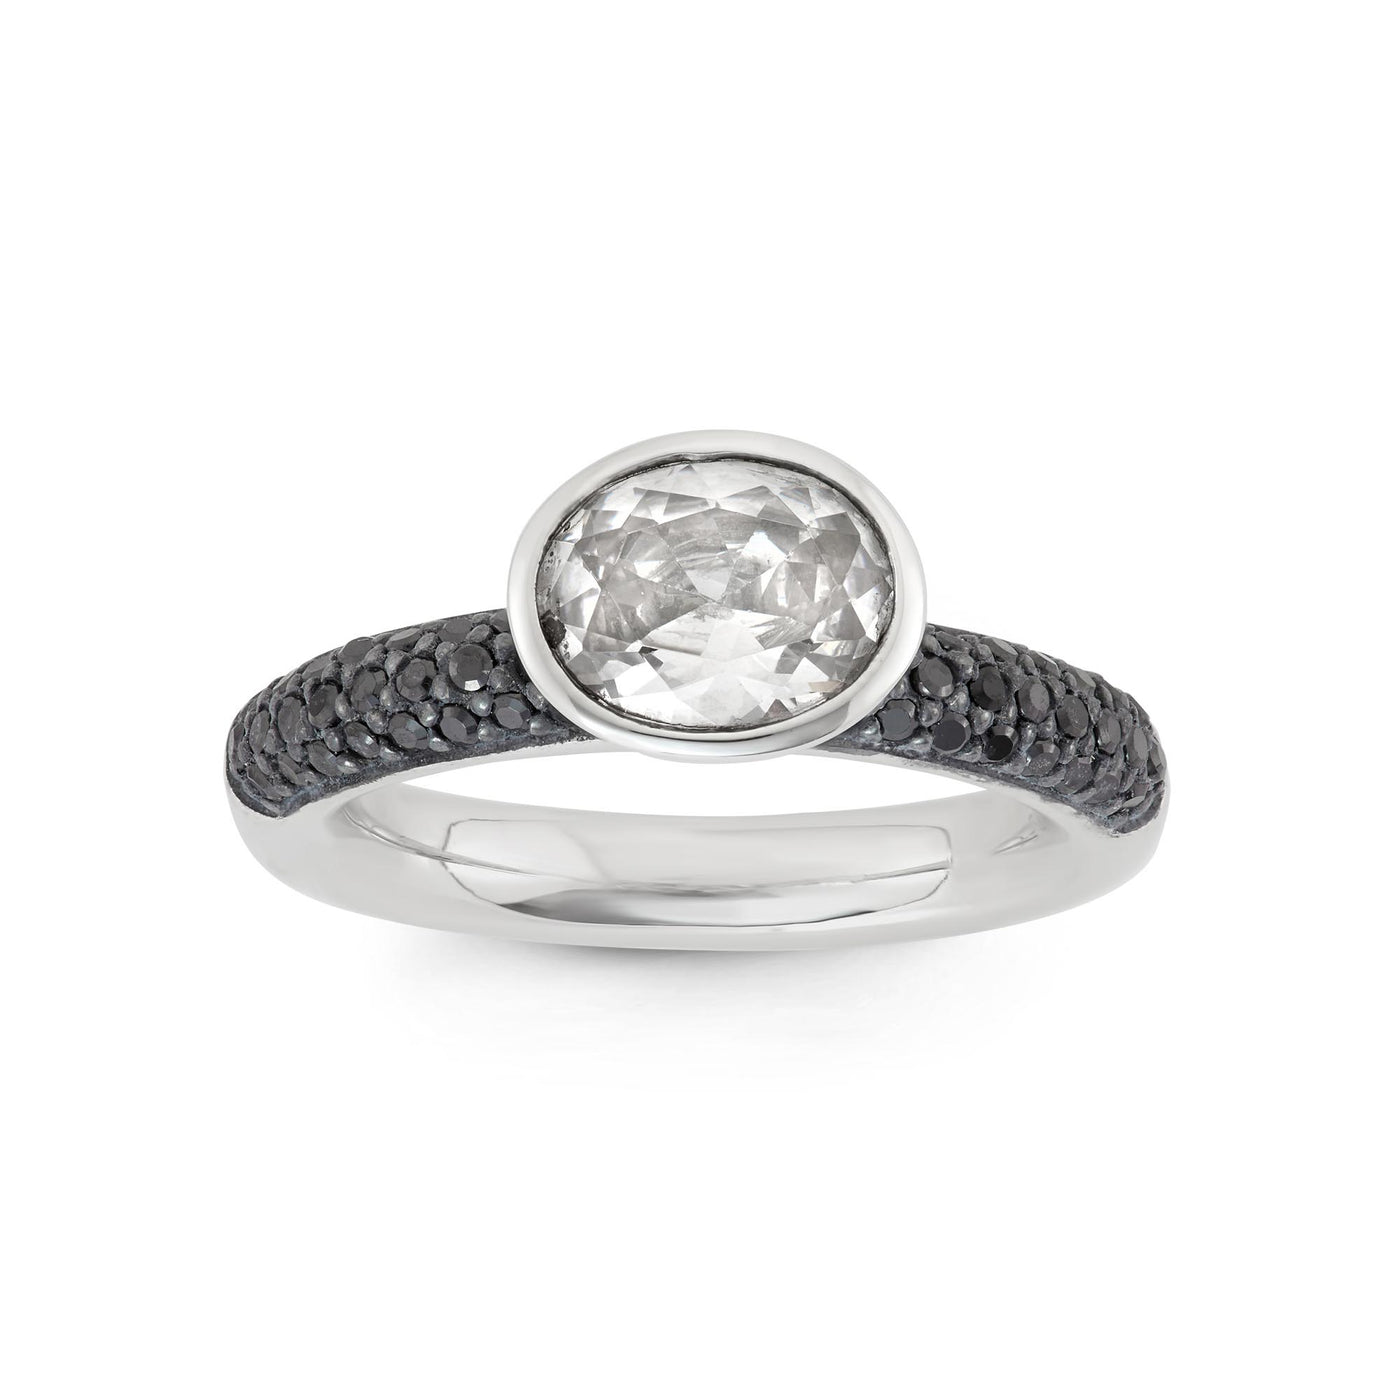 Rebecca Sloane Silver Ring With Pave Black CZ and White CZ